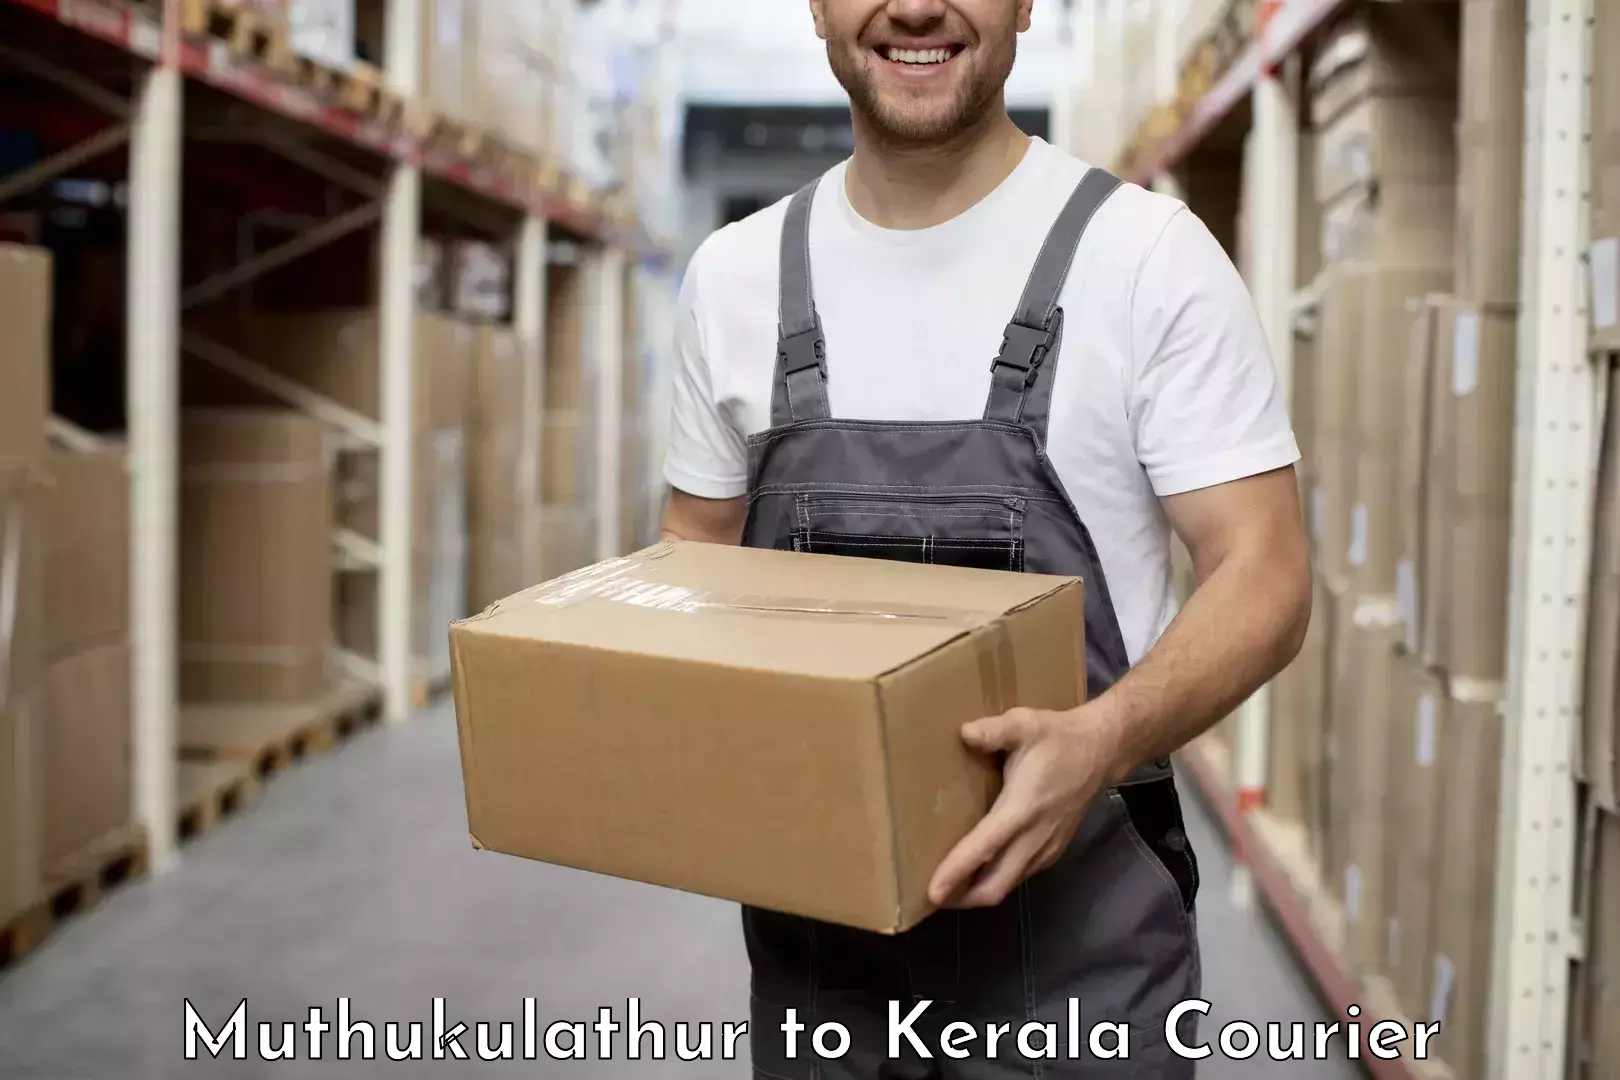 Door-to-door freight service Muthukulathur to Cochin University of Science and Technology